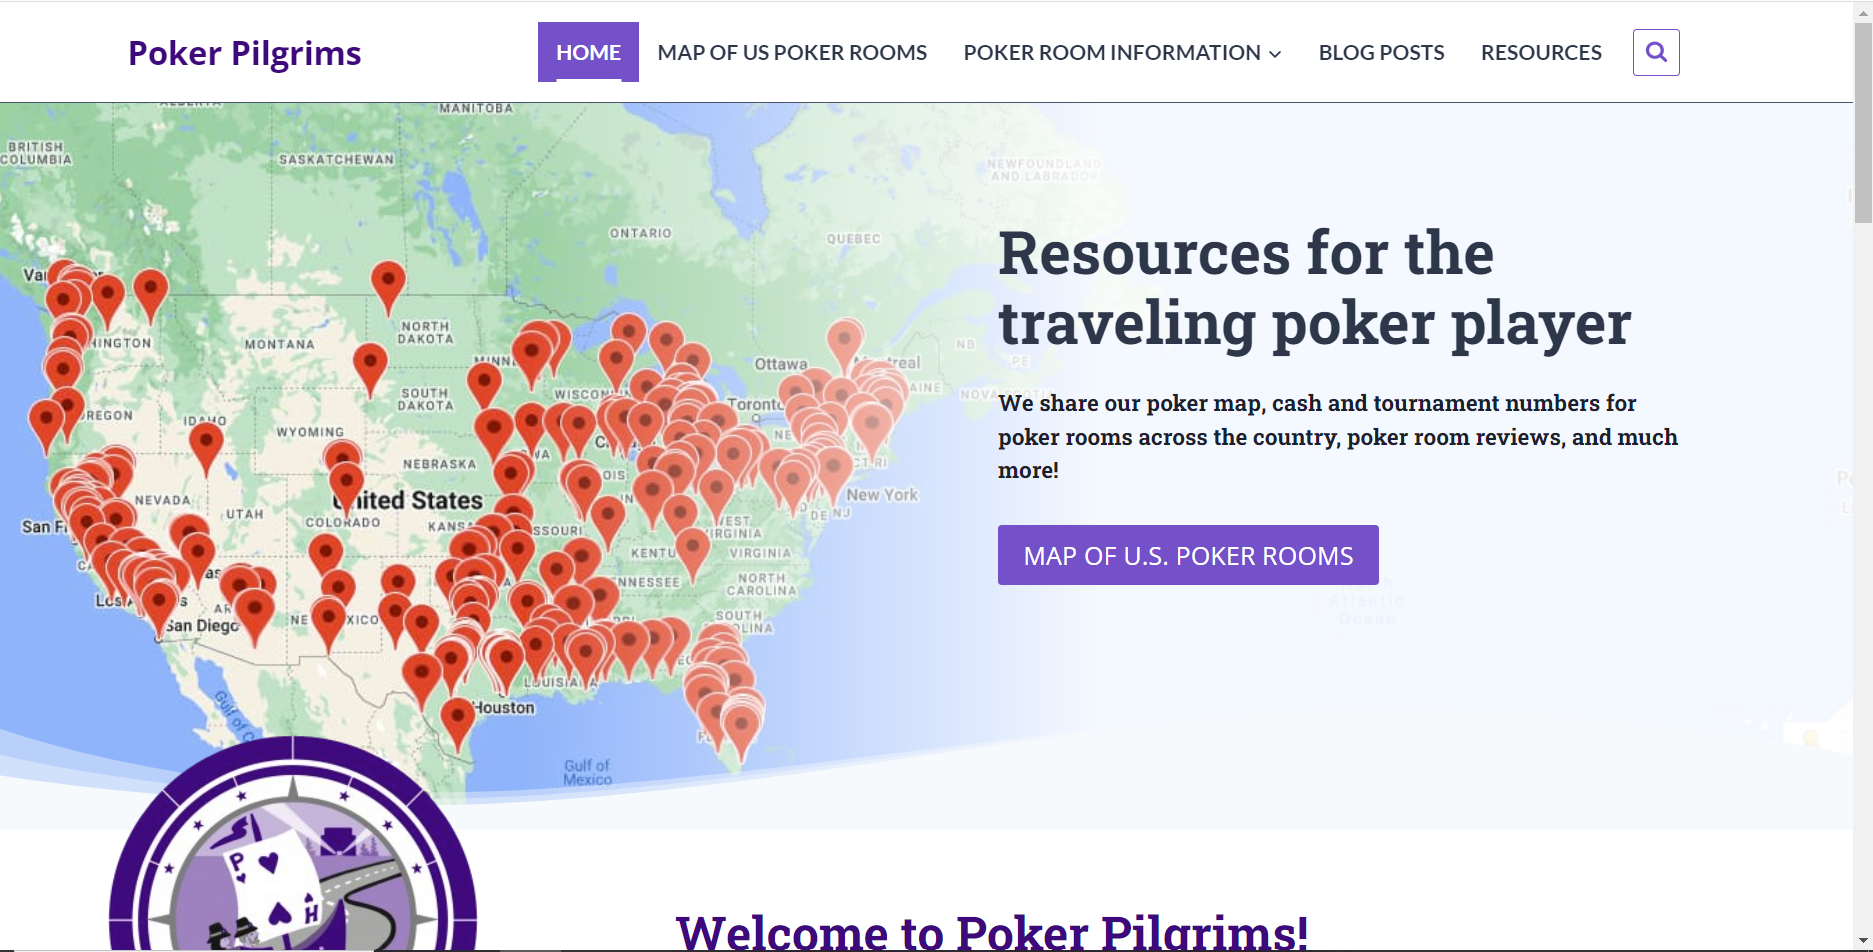 Poker Pilgrims Home Page